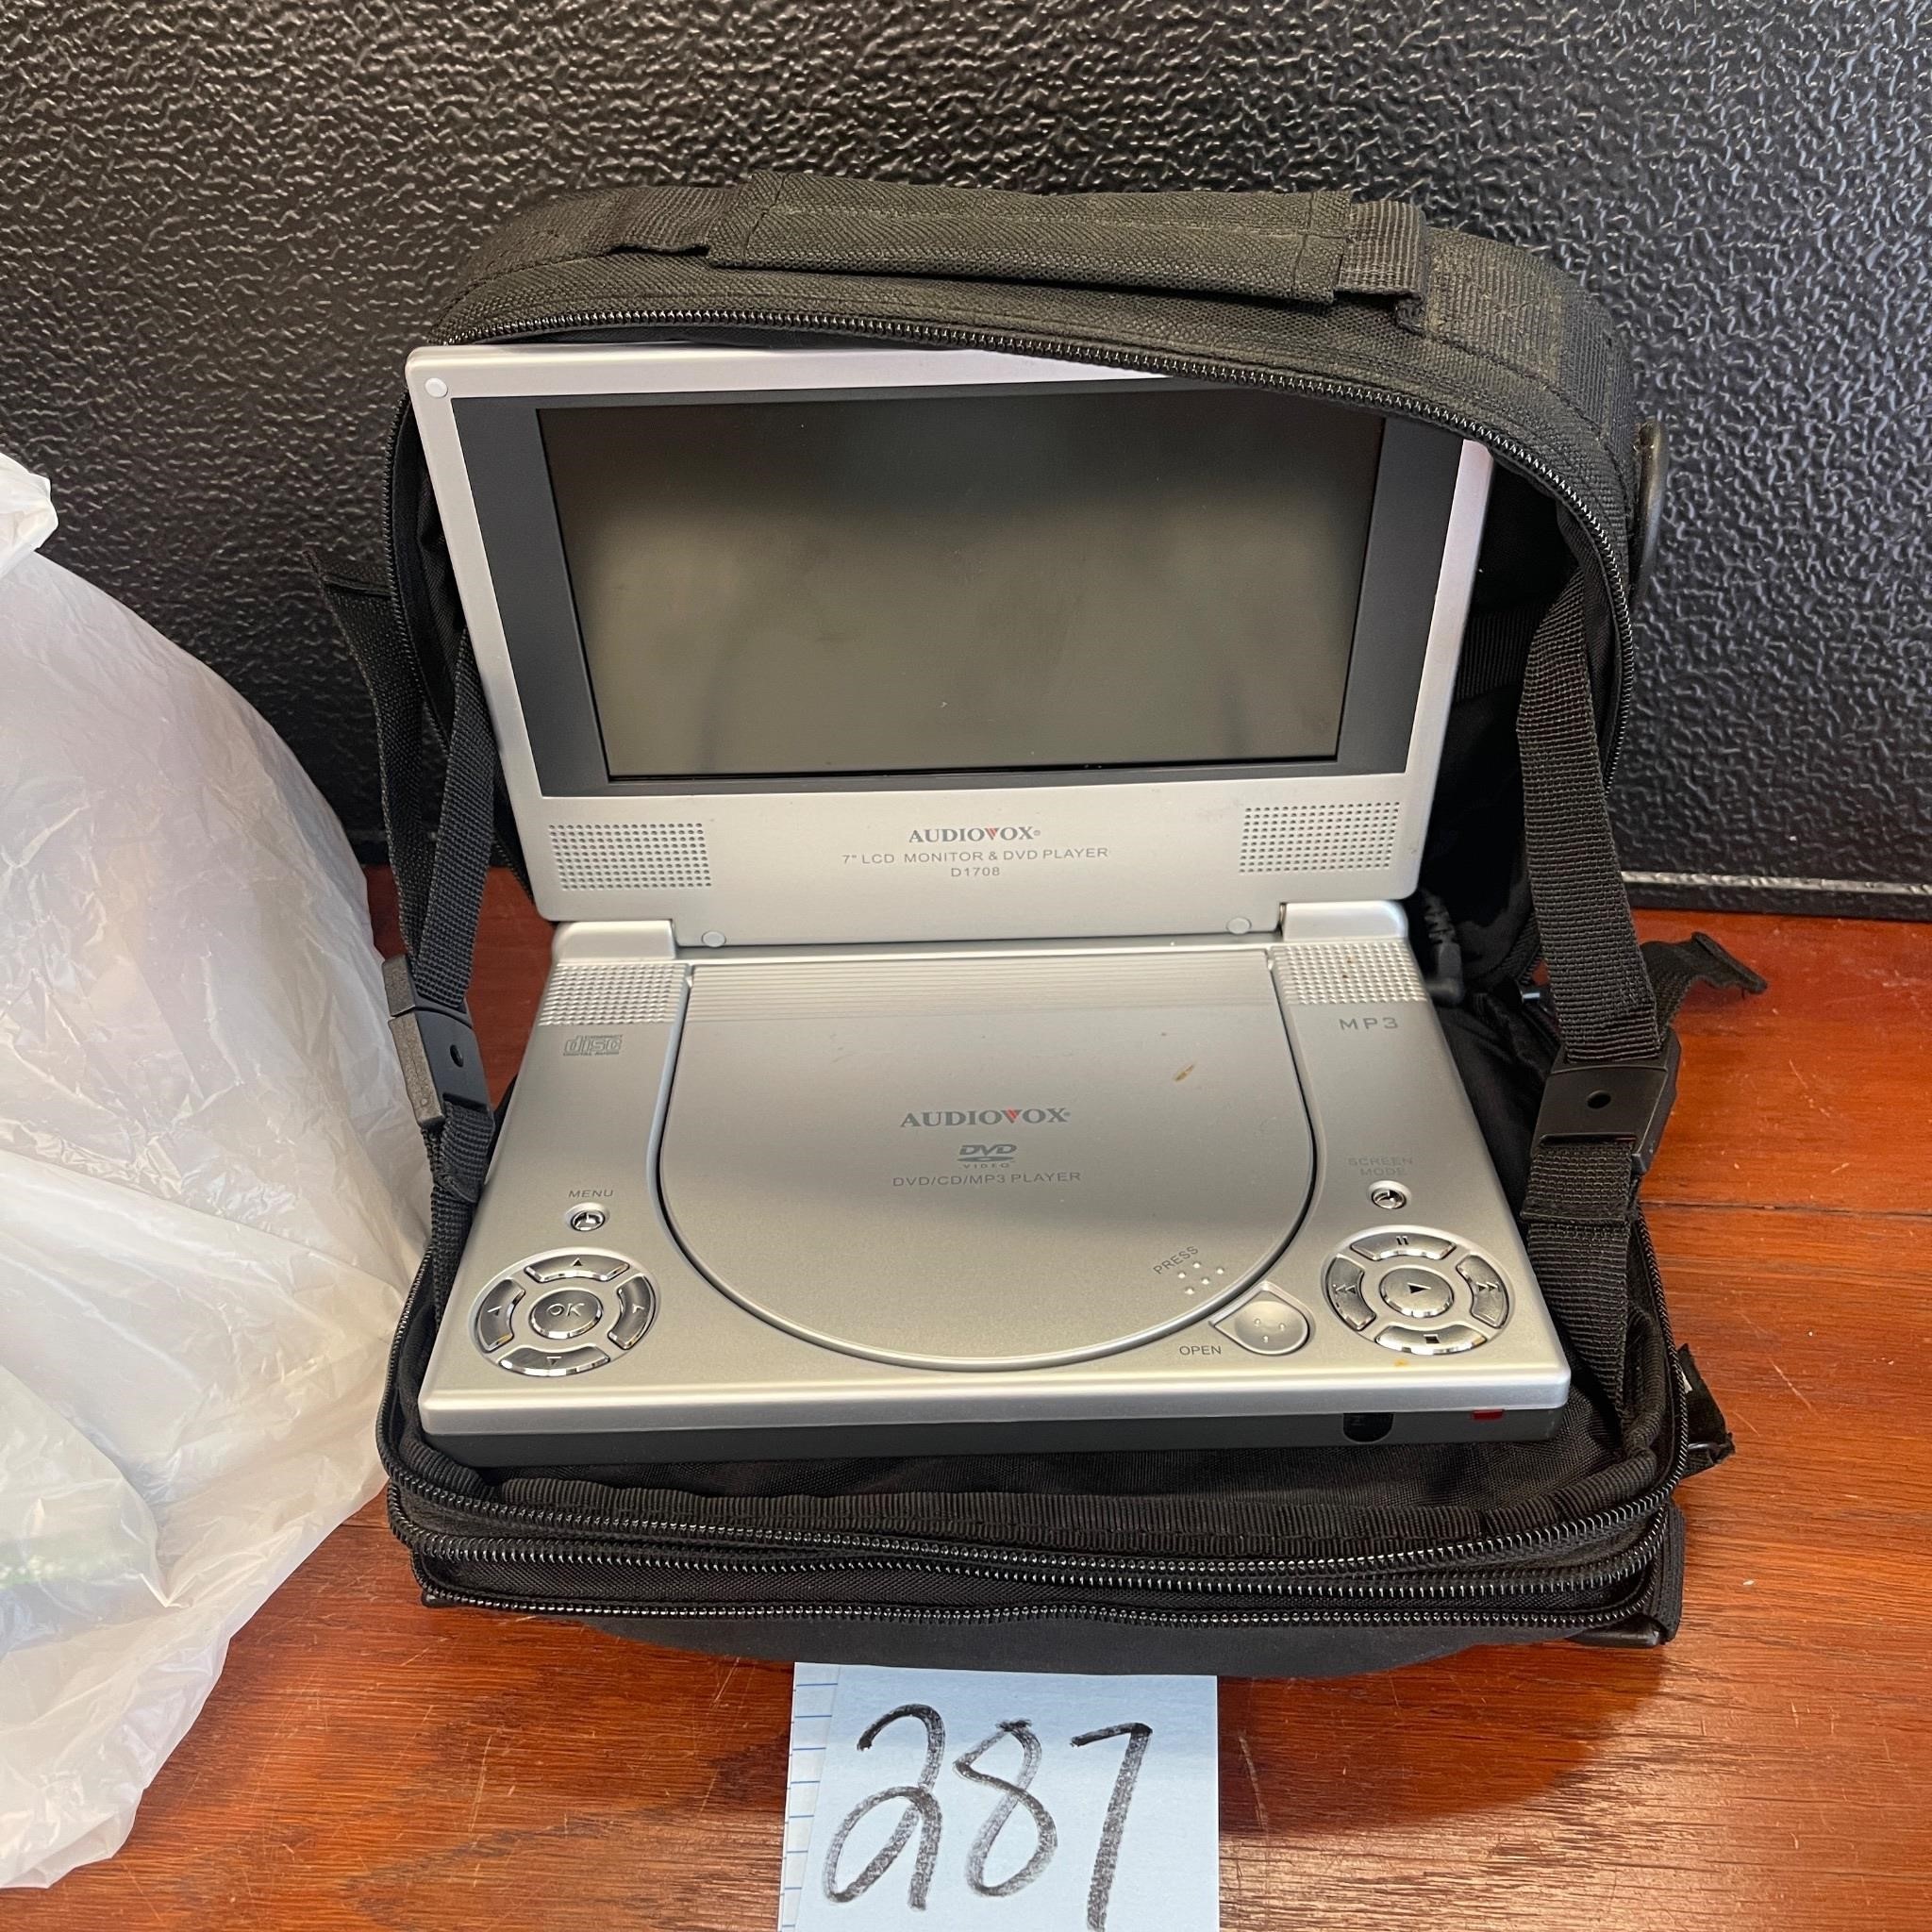 Audiovox portable DVD player 7" monitor & case